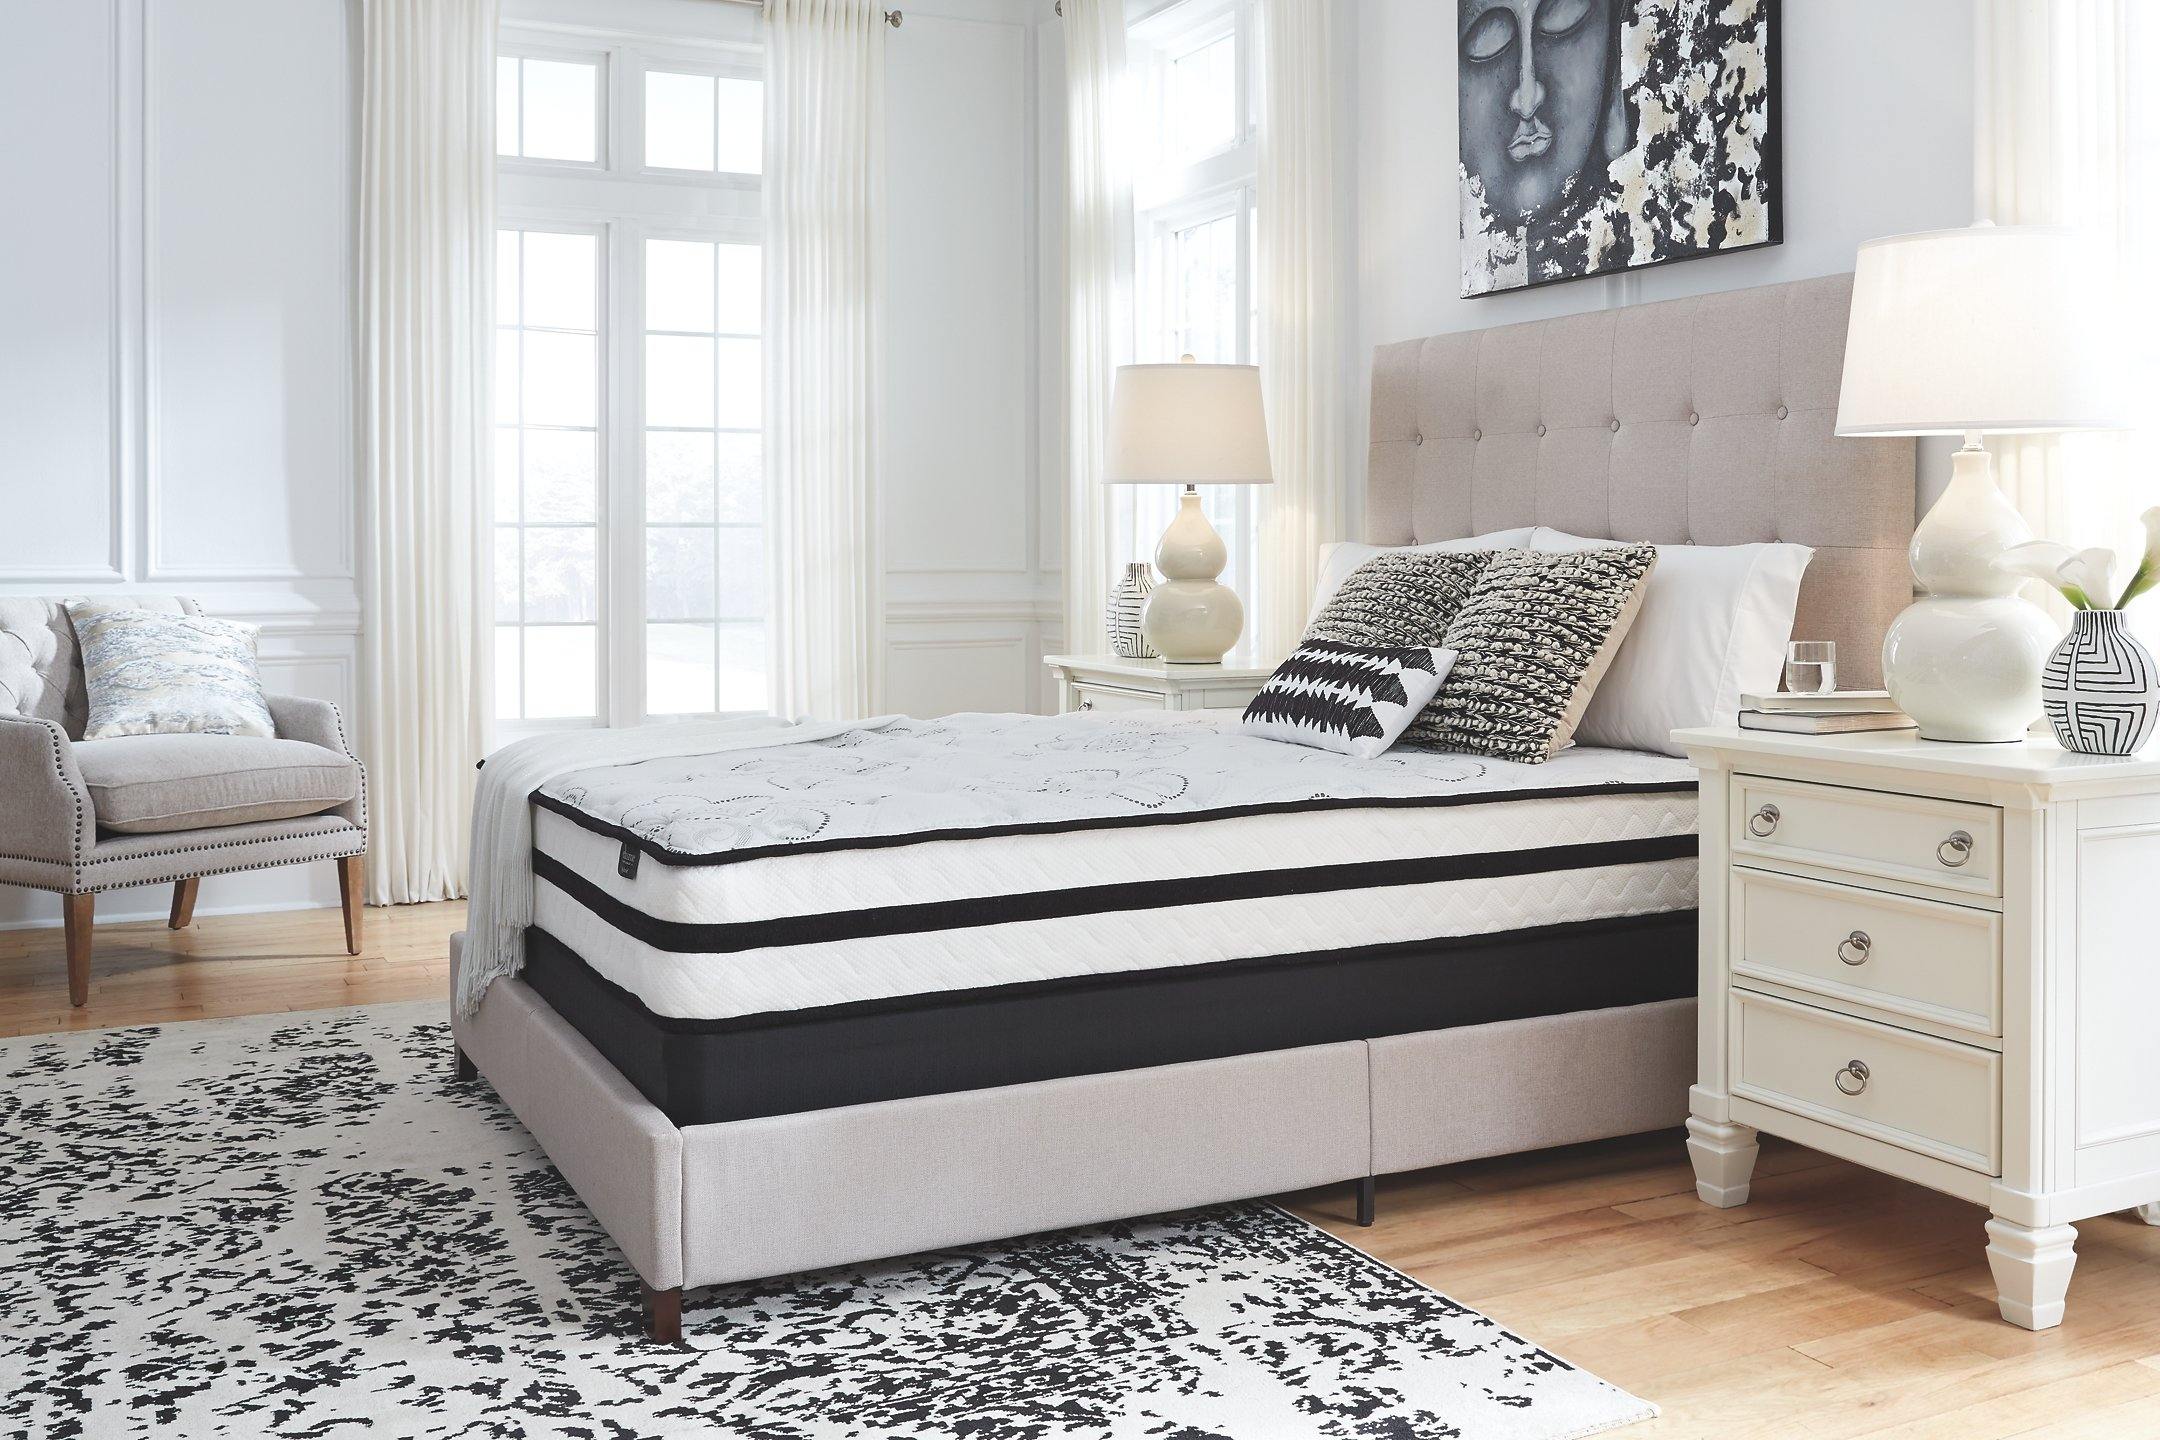 Chime 10 Inch Hybrid 10 Inch Queen Mattress and Pillow M696M1 Hybrid Master Mattresses By ashley - sofafair.com